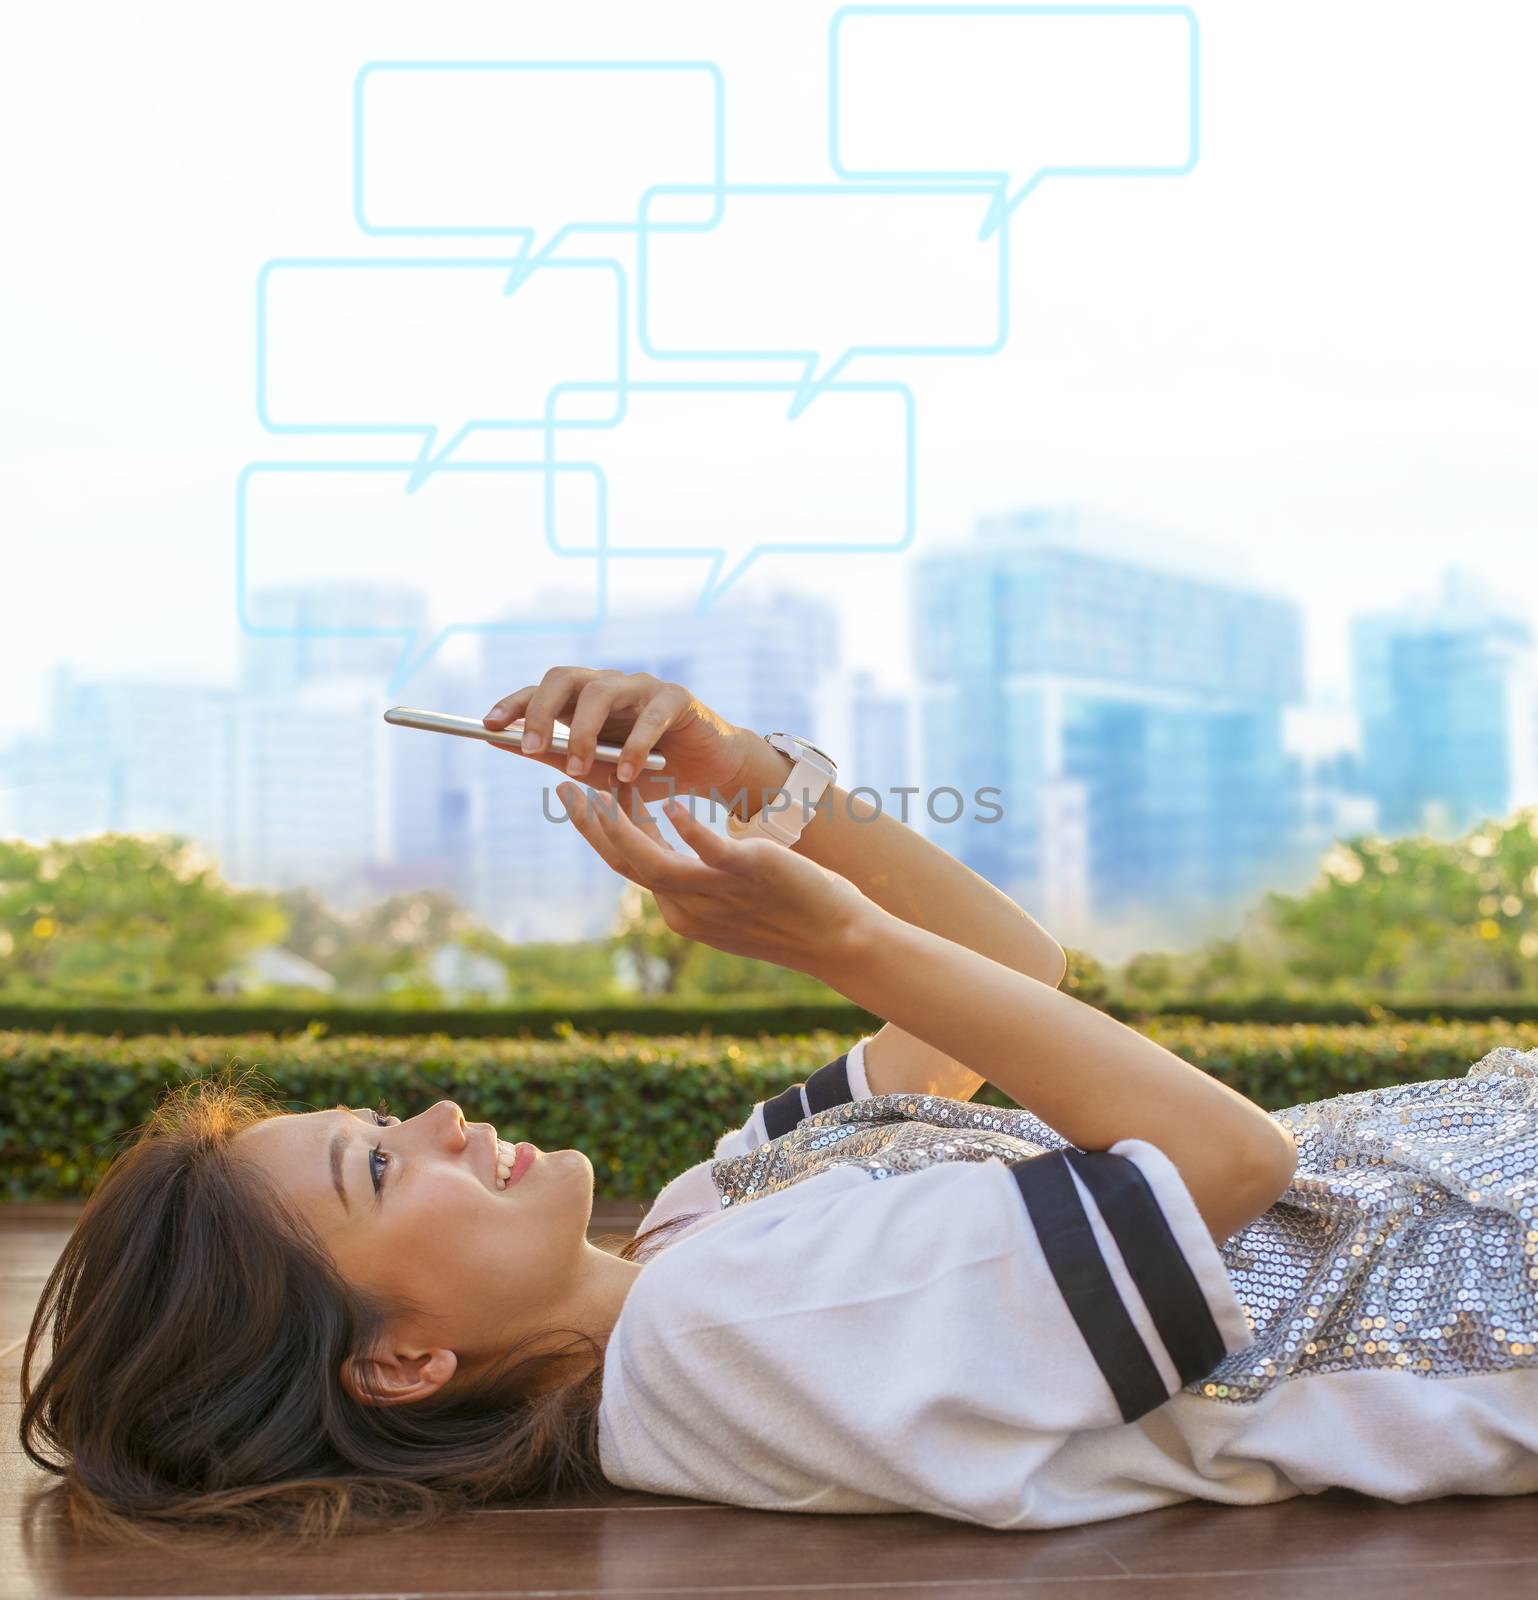 city life style of asian woman lying and touching on mobile phone screen against green environment and urban skylind background